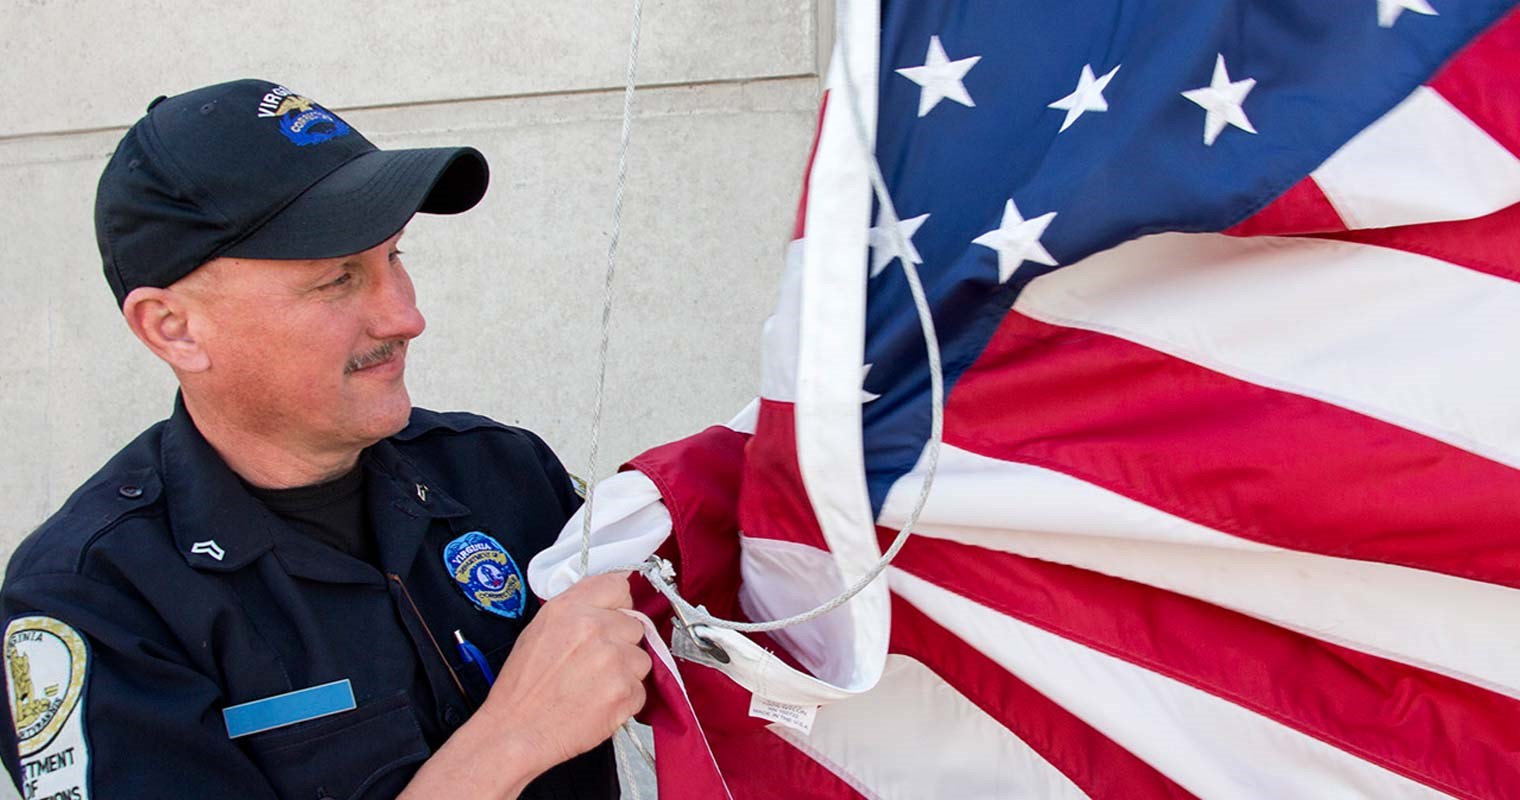 VADOC officer prepping USA flag to be raised.